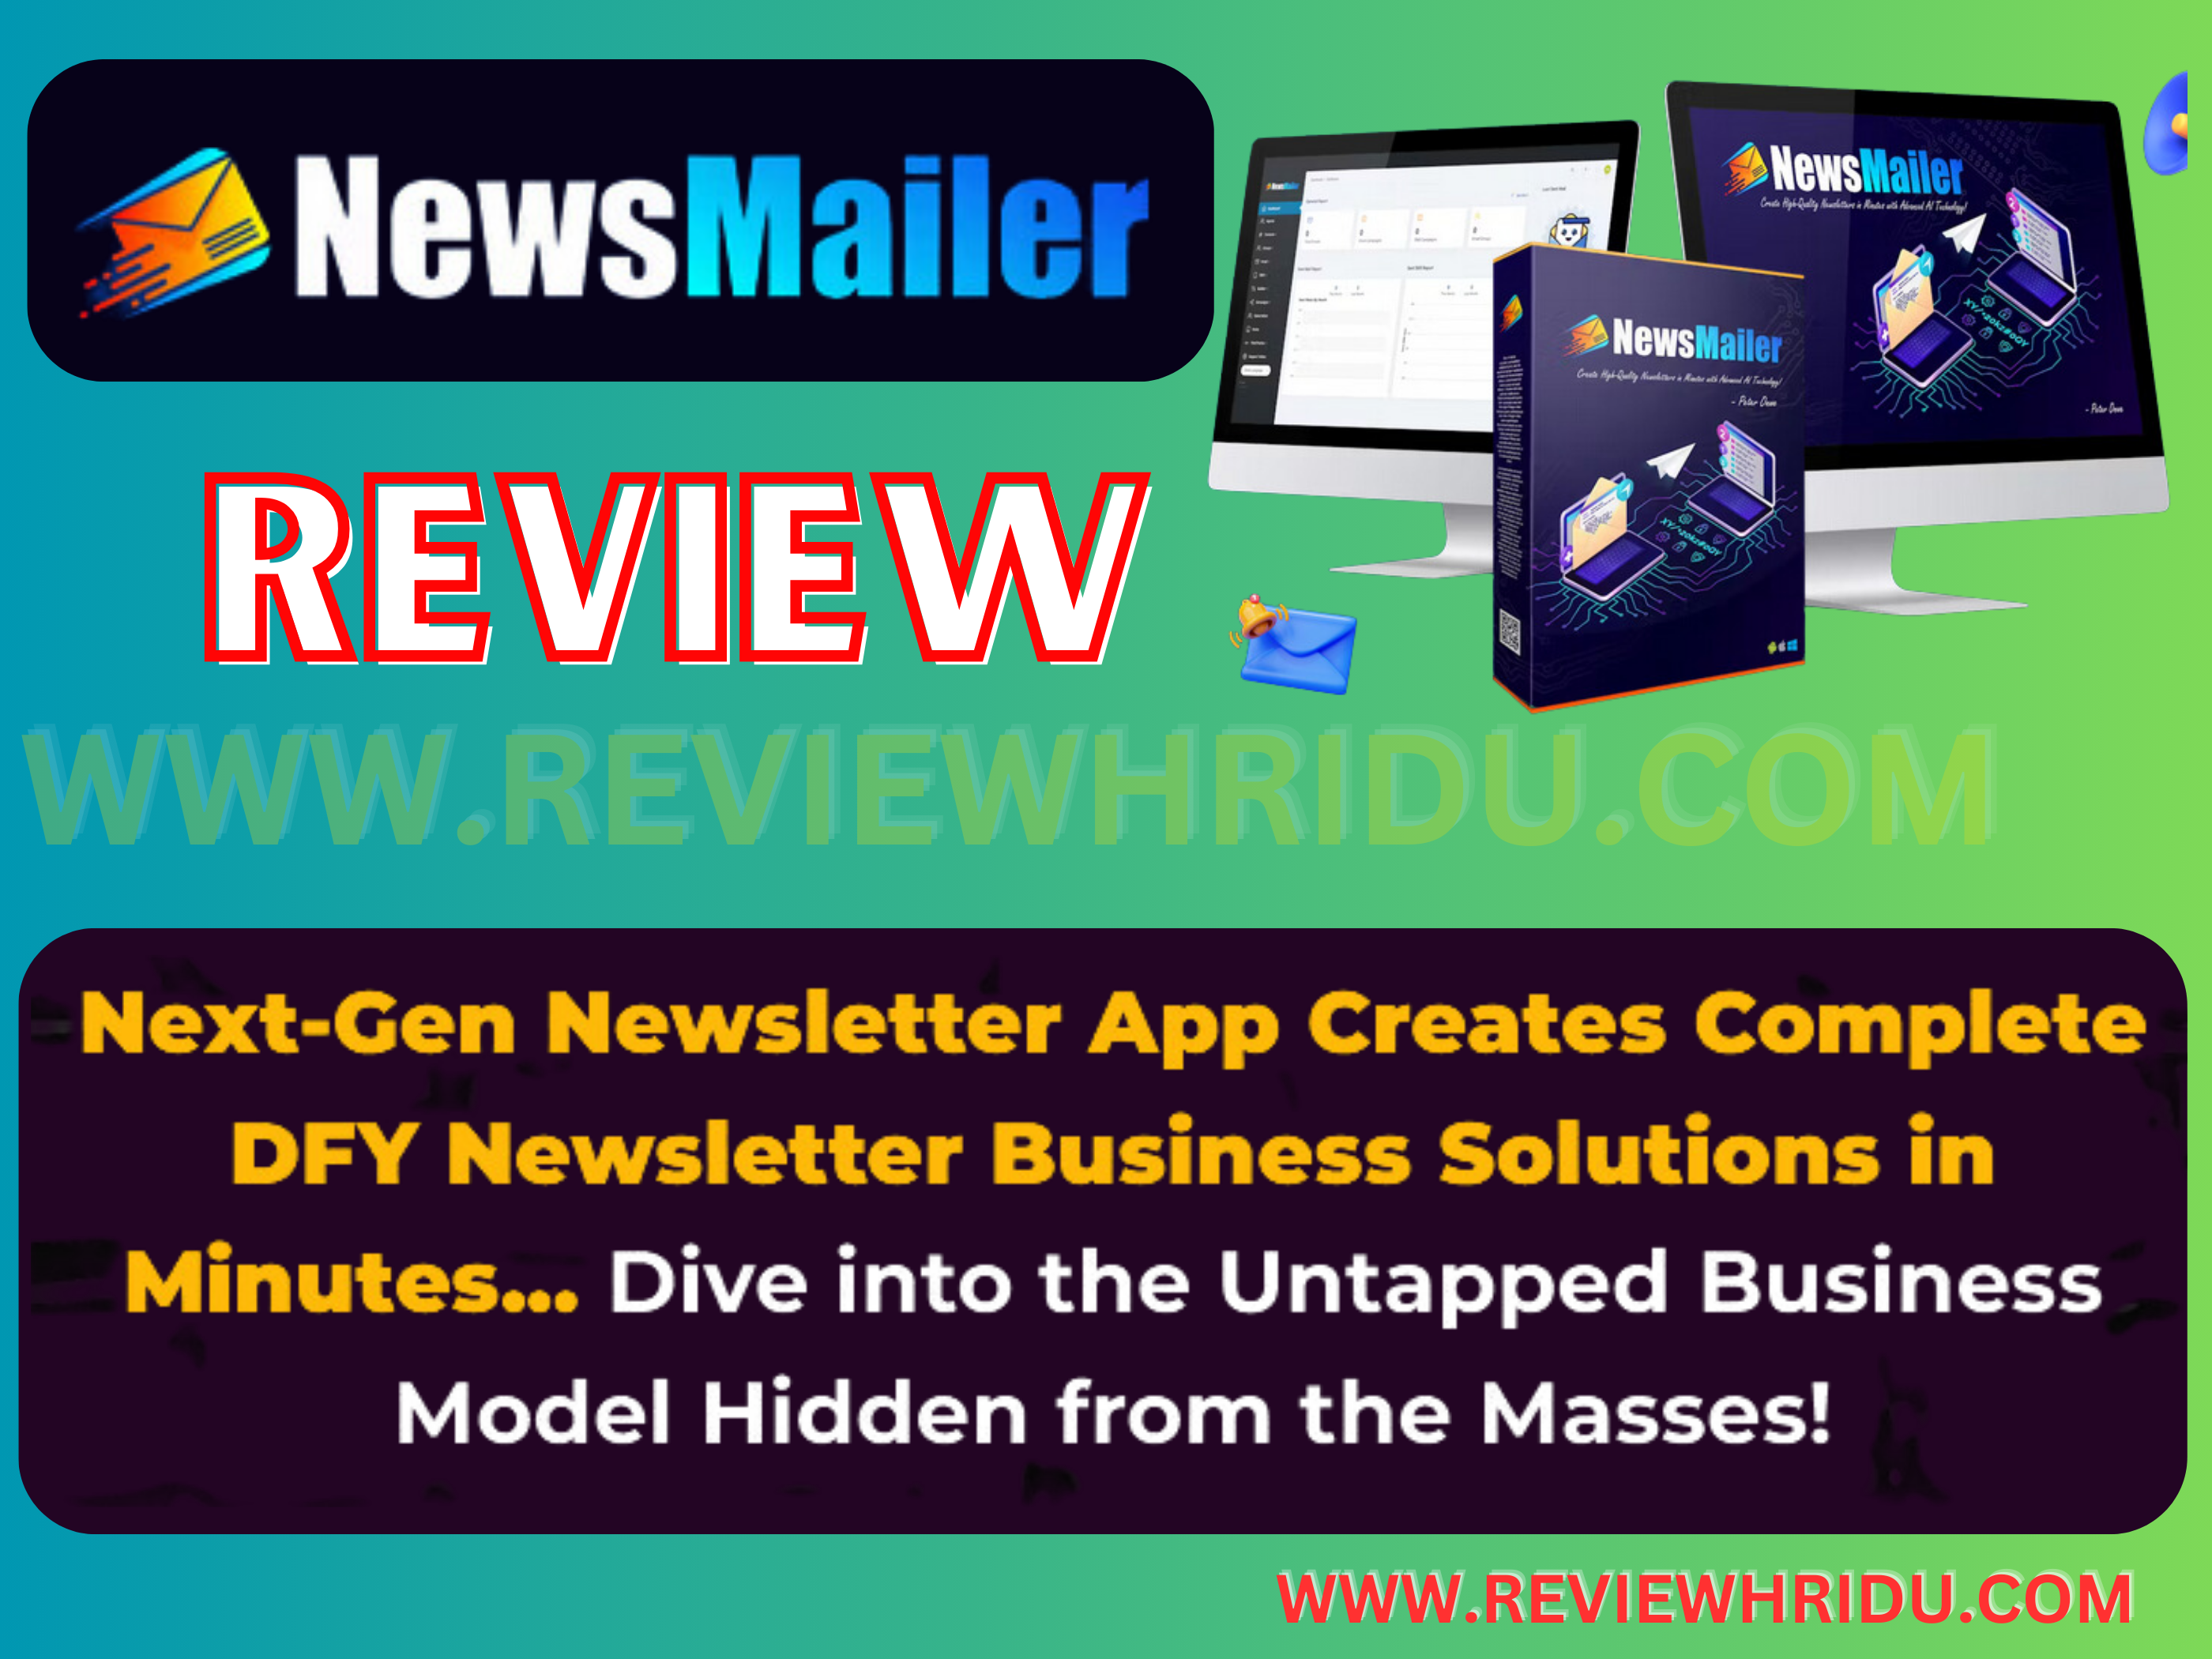 NewsMailer Review ||Newsletter Business Solutions in Minutes